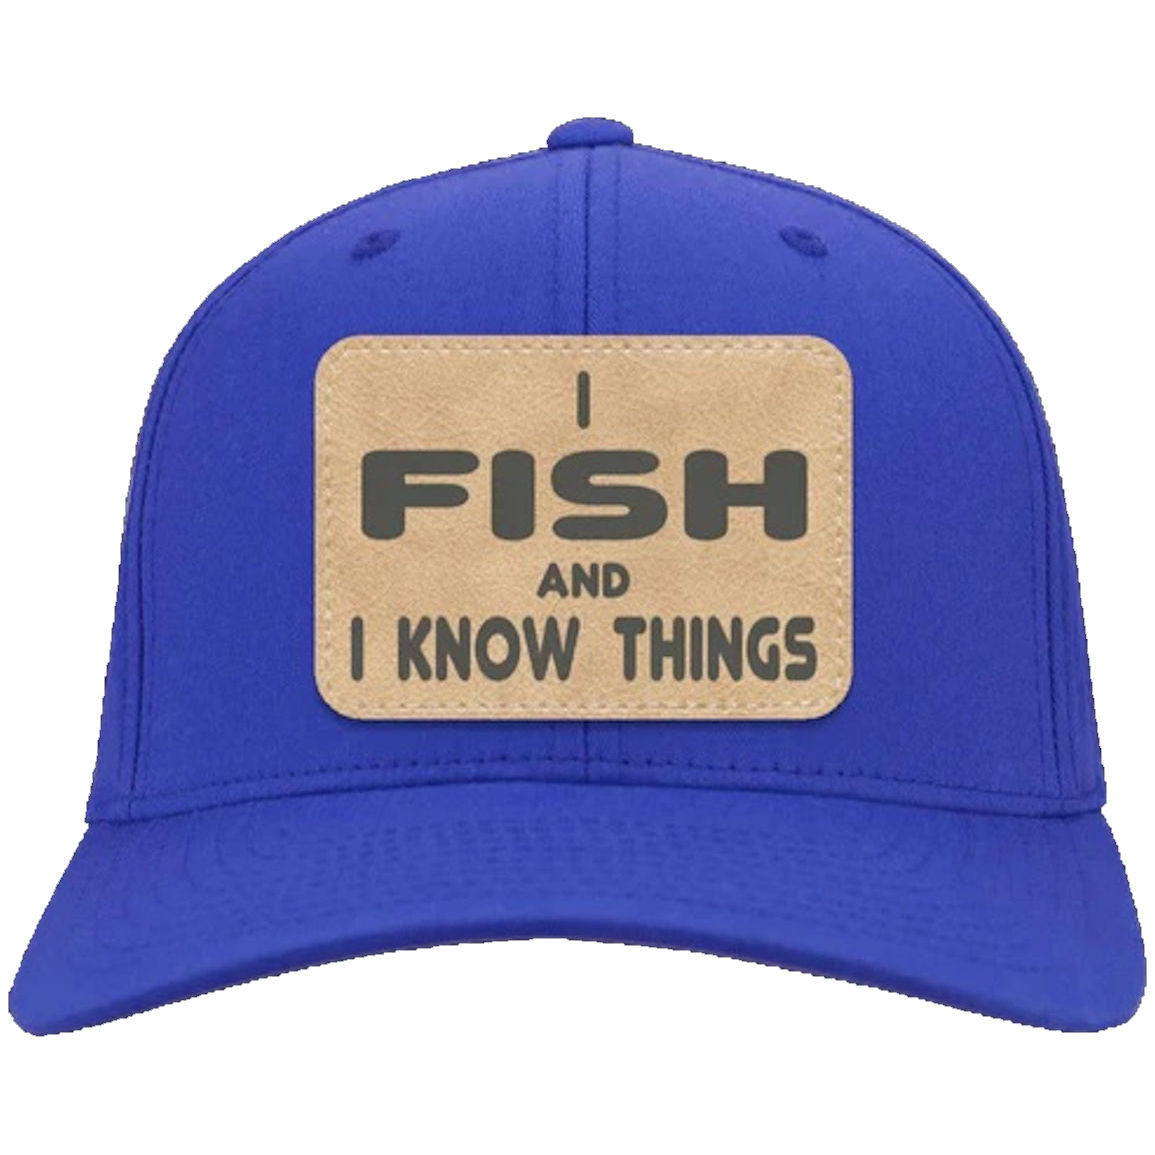 I Fish and Know Things Twill Cap royal